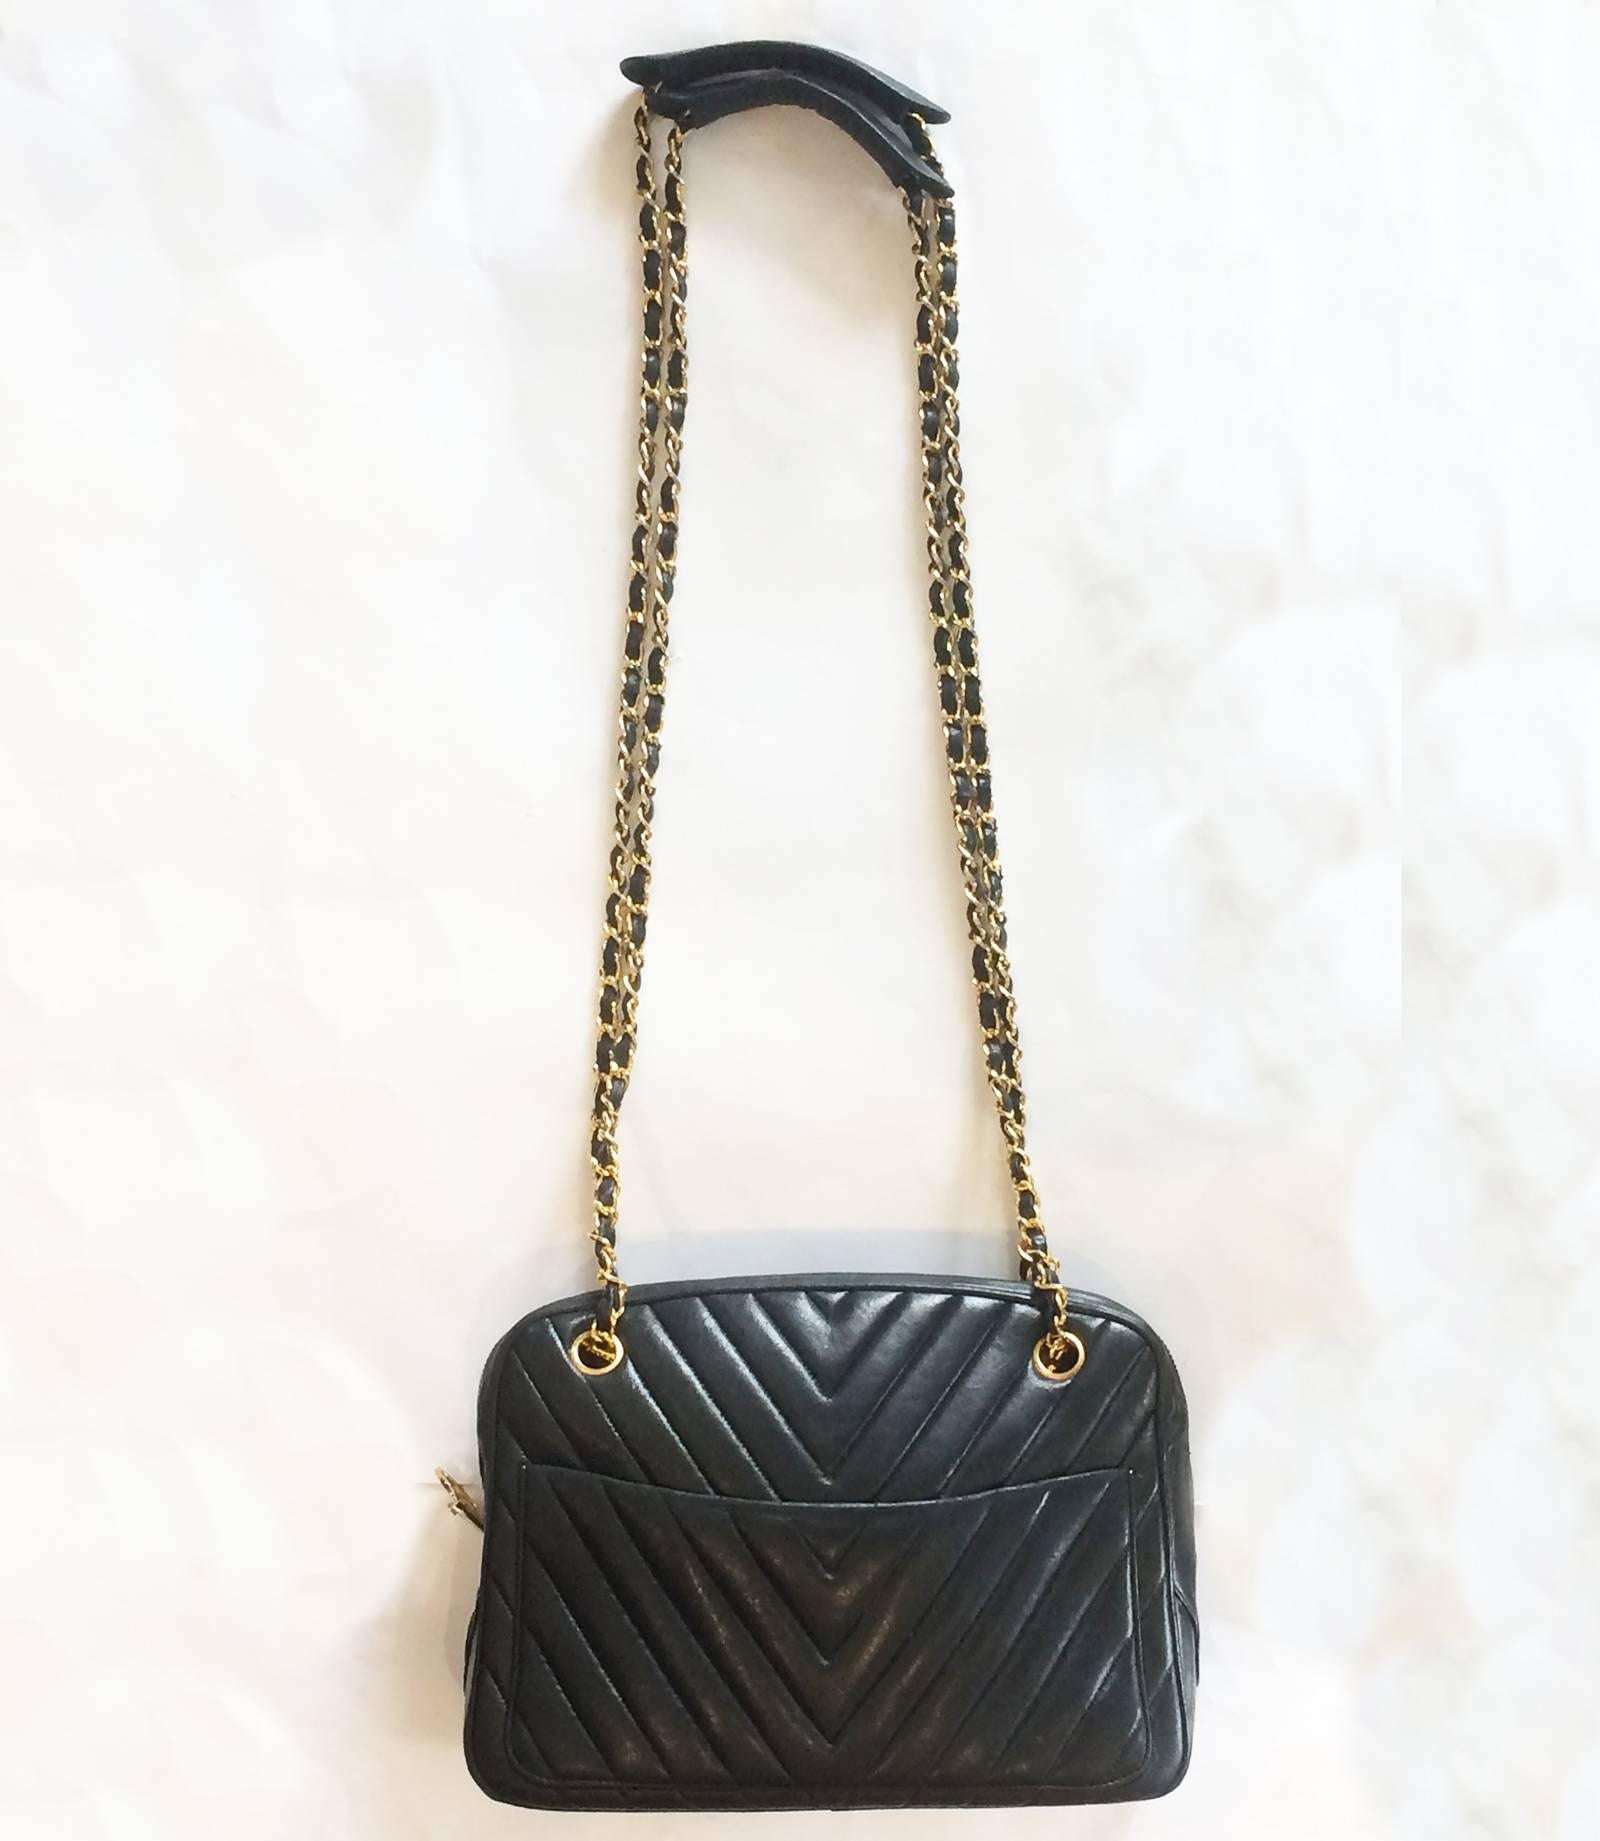 Authentic Shoulder Bag by Chanel, in Black Matelassé Leather with “V” stitch and black leather threaded, gilt chain shoulder straps, with adjustable padded tops and adjustable/removable straps. Outer has a large pocket to both front and rear; inner